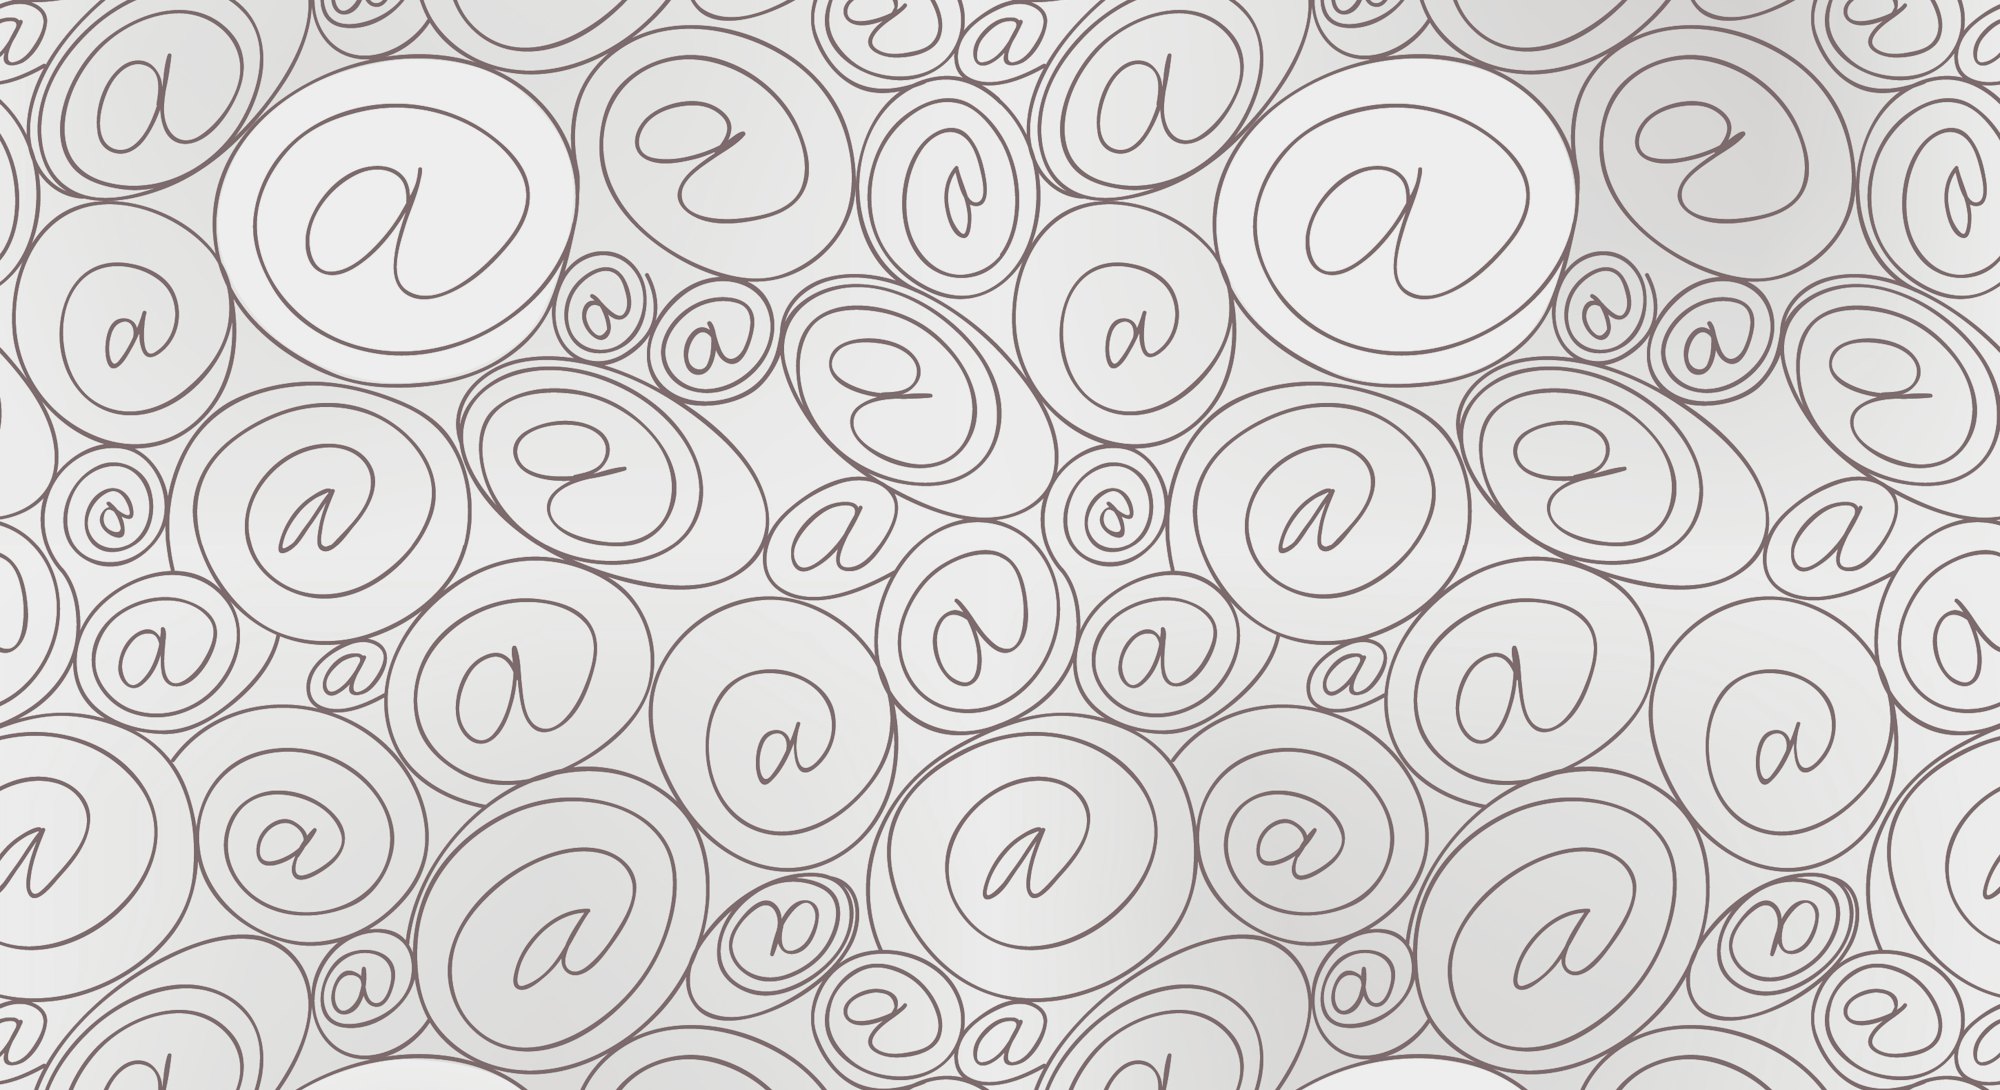 e-mail sign seamless background. email or spam mail pattern concept.